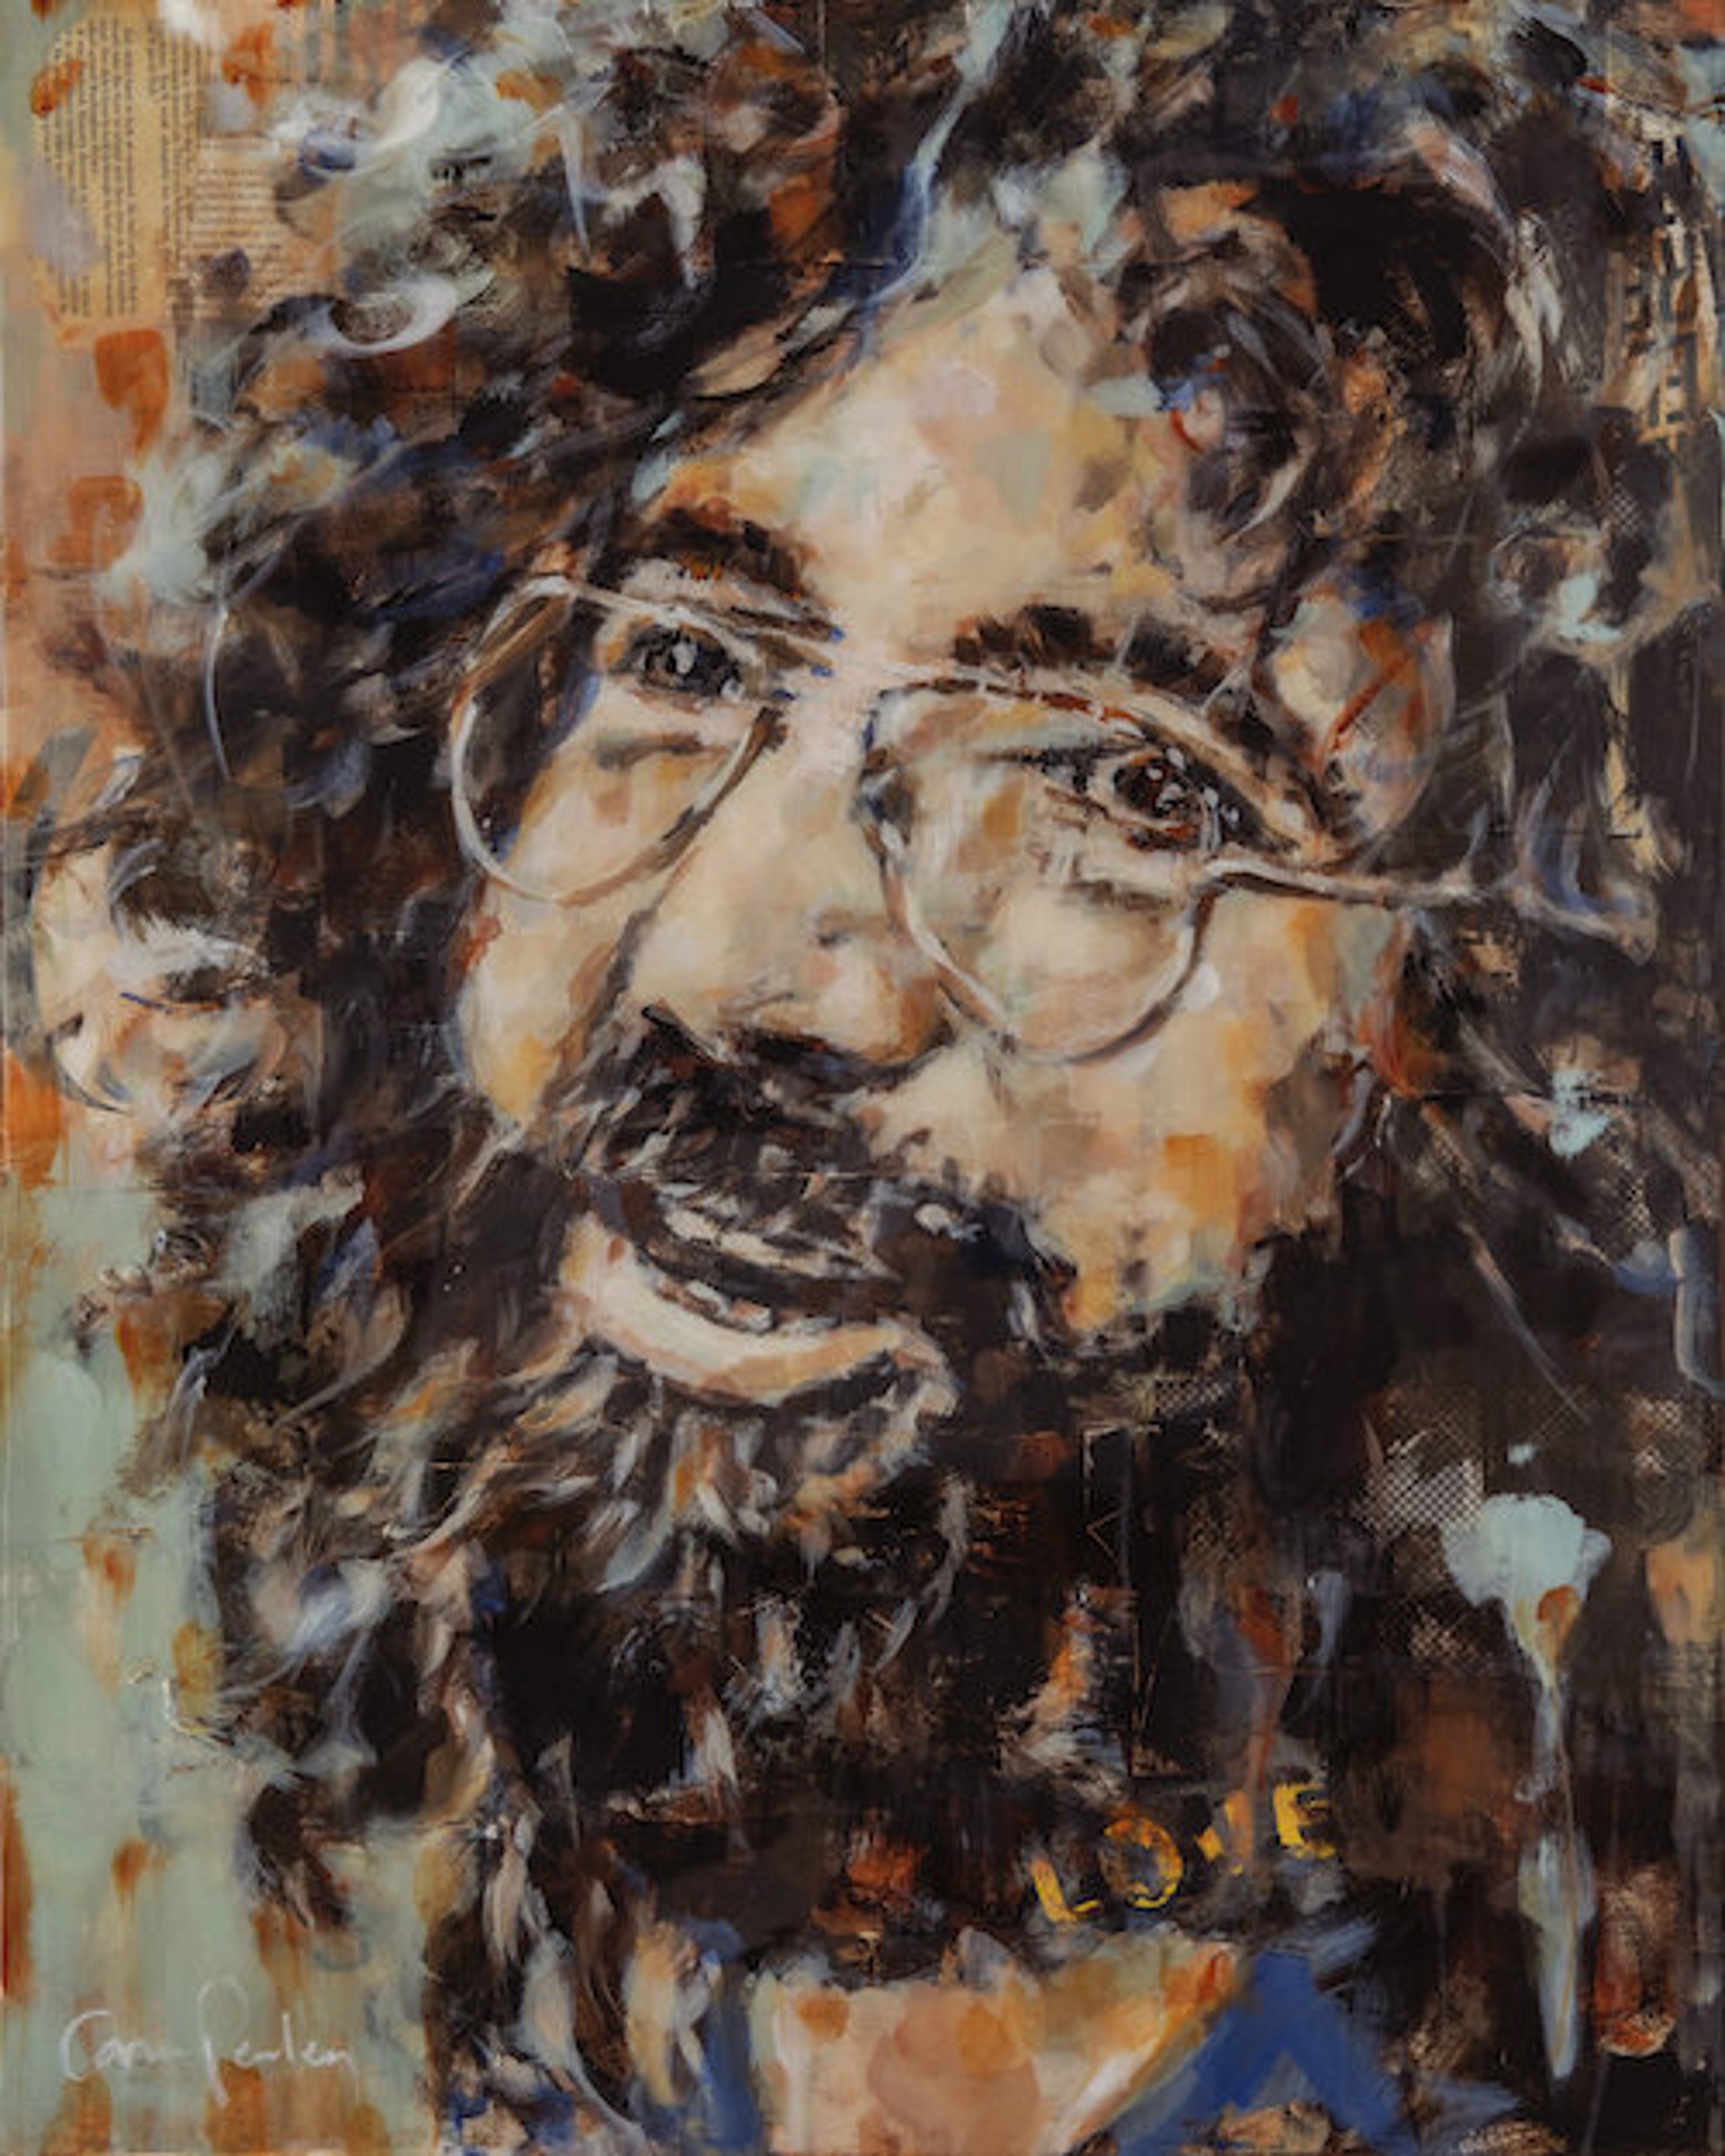 Jerry by Carrie Penley